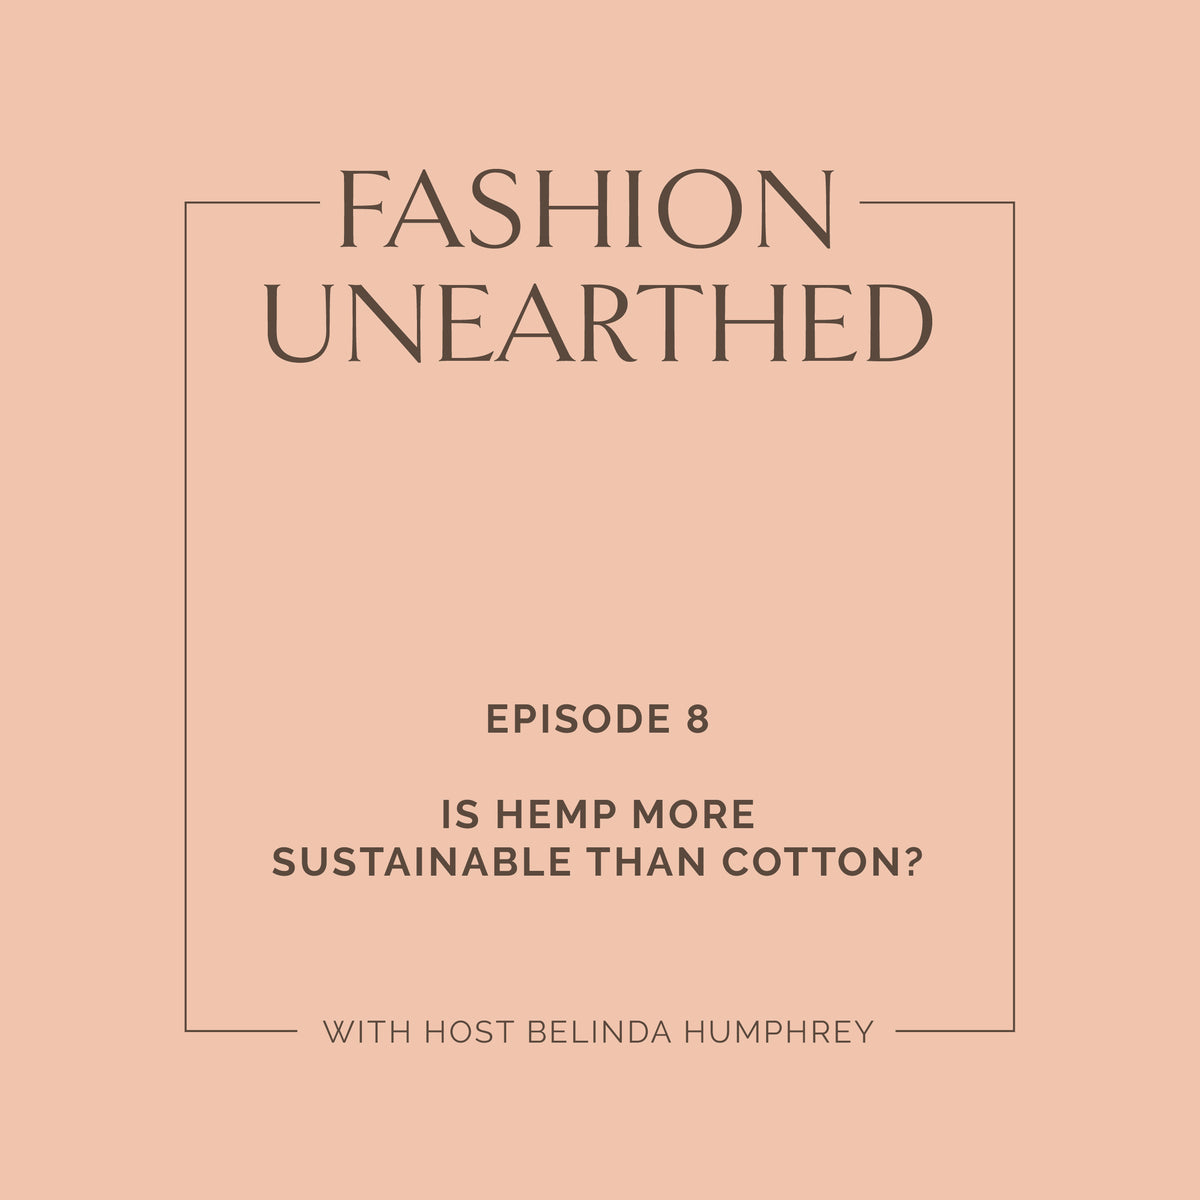 Episode 8: Is hemp more sustainable than cotton?